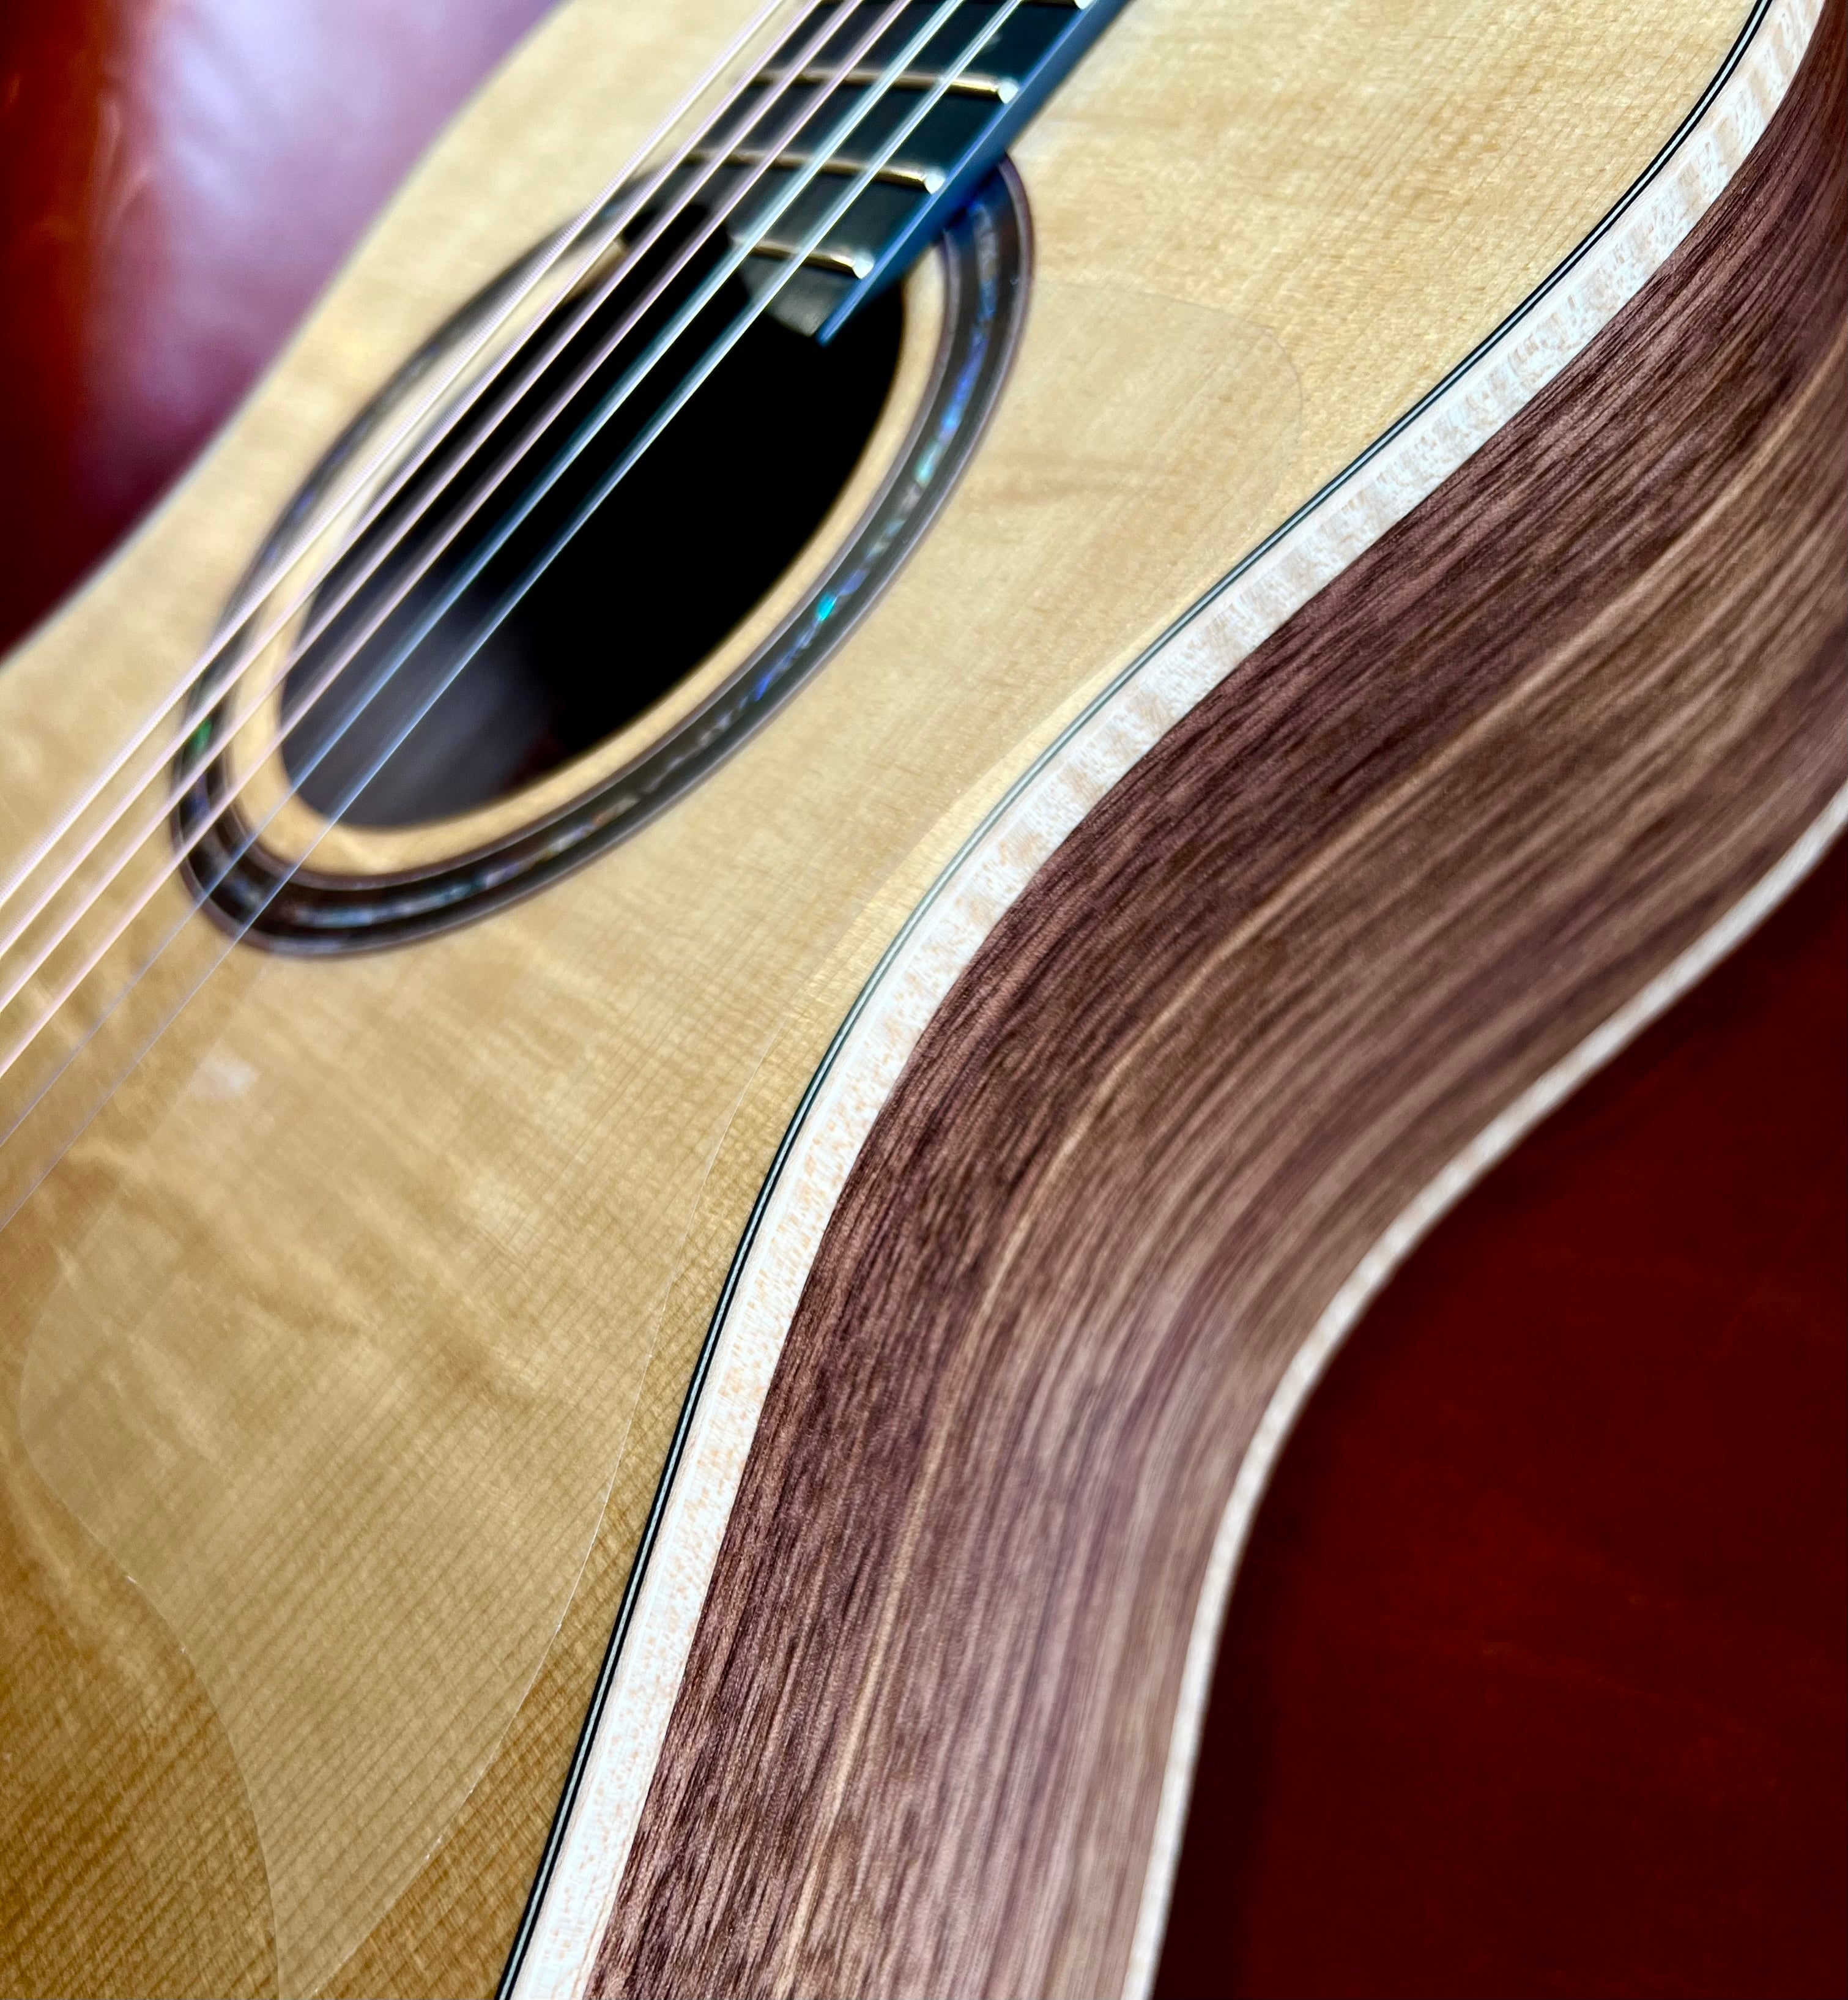 Dowina Walnut BV Deluxe Torrified Swiss Moon Spruce W' Semi Gloss Finish, Acoustic Guitar for sale at Richards Guitars.